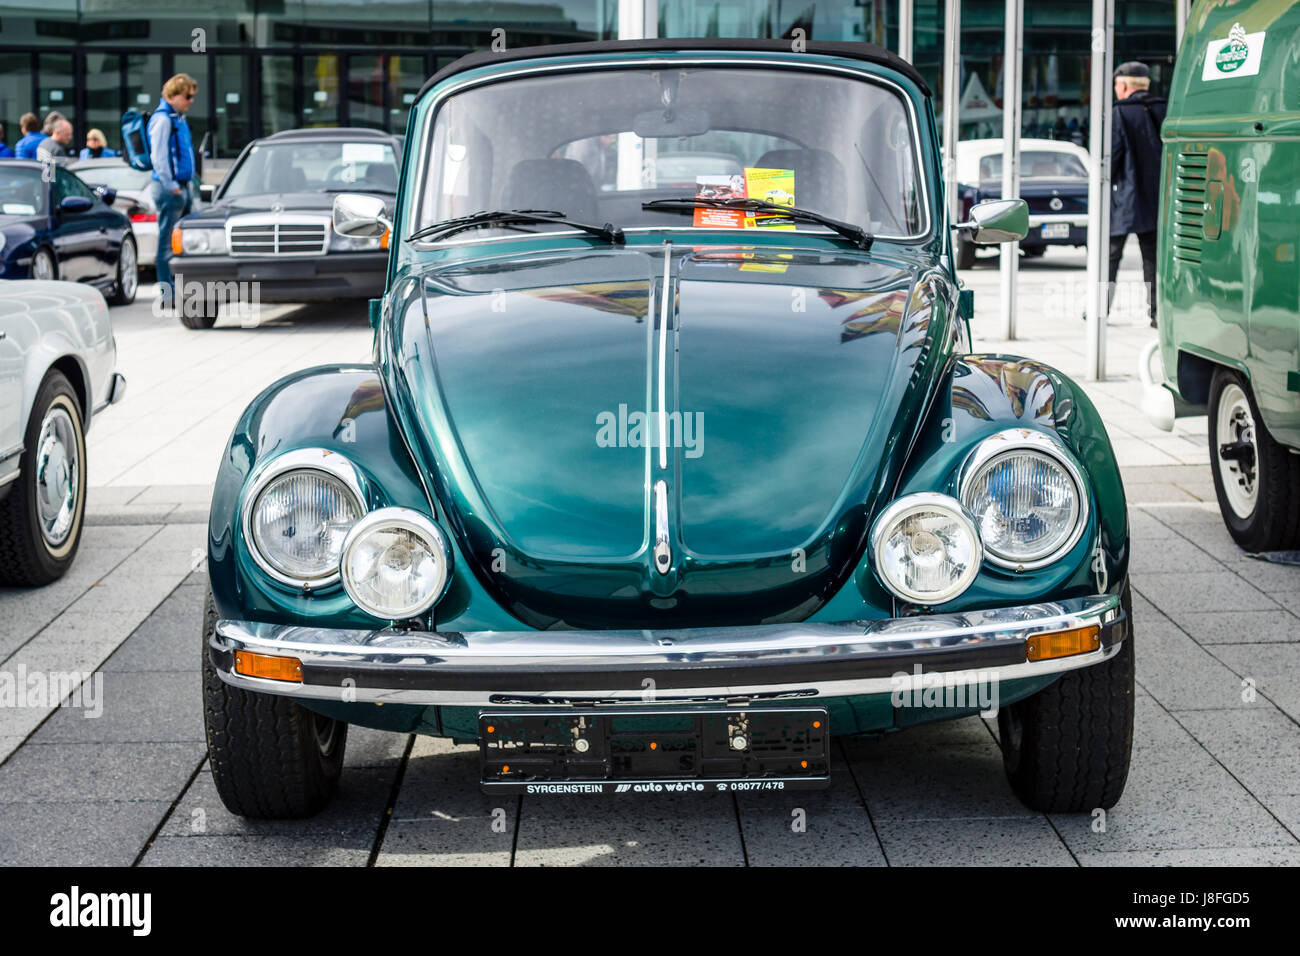 STUTTGART, GERMANY - MARCH 04, 2017: Compact car Volkswagen Beetle Cabrio, 1976. Europe's greatest classic car exhibition 'RETRO CLASSICS' Stock Photo